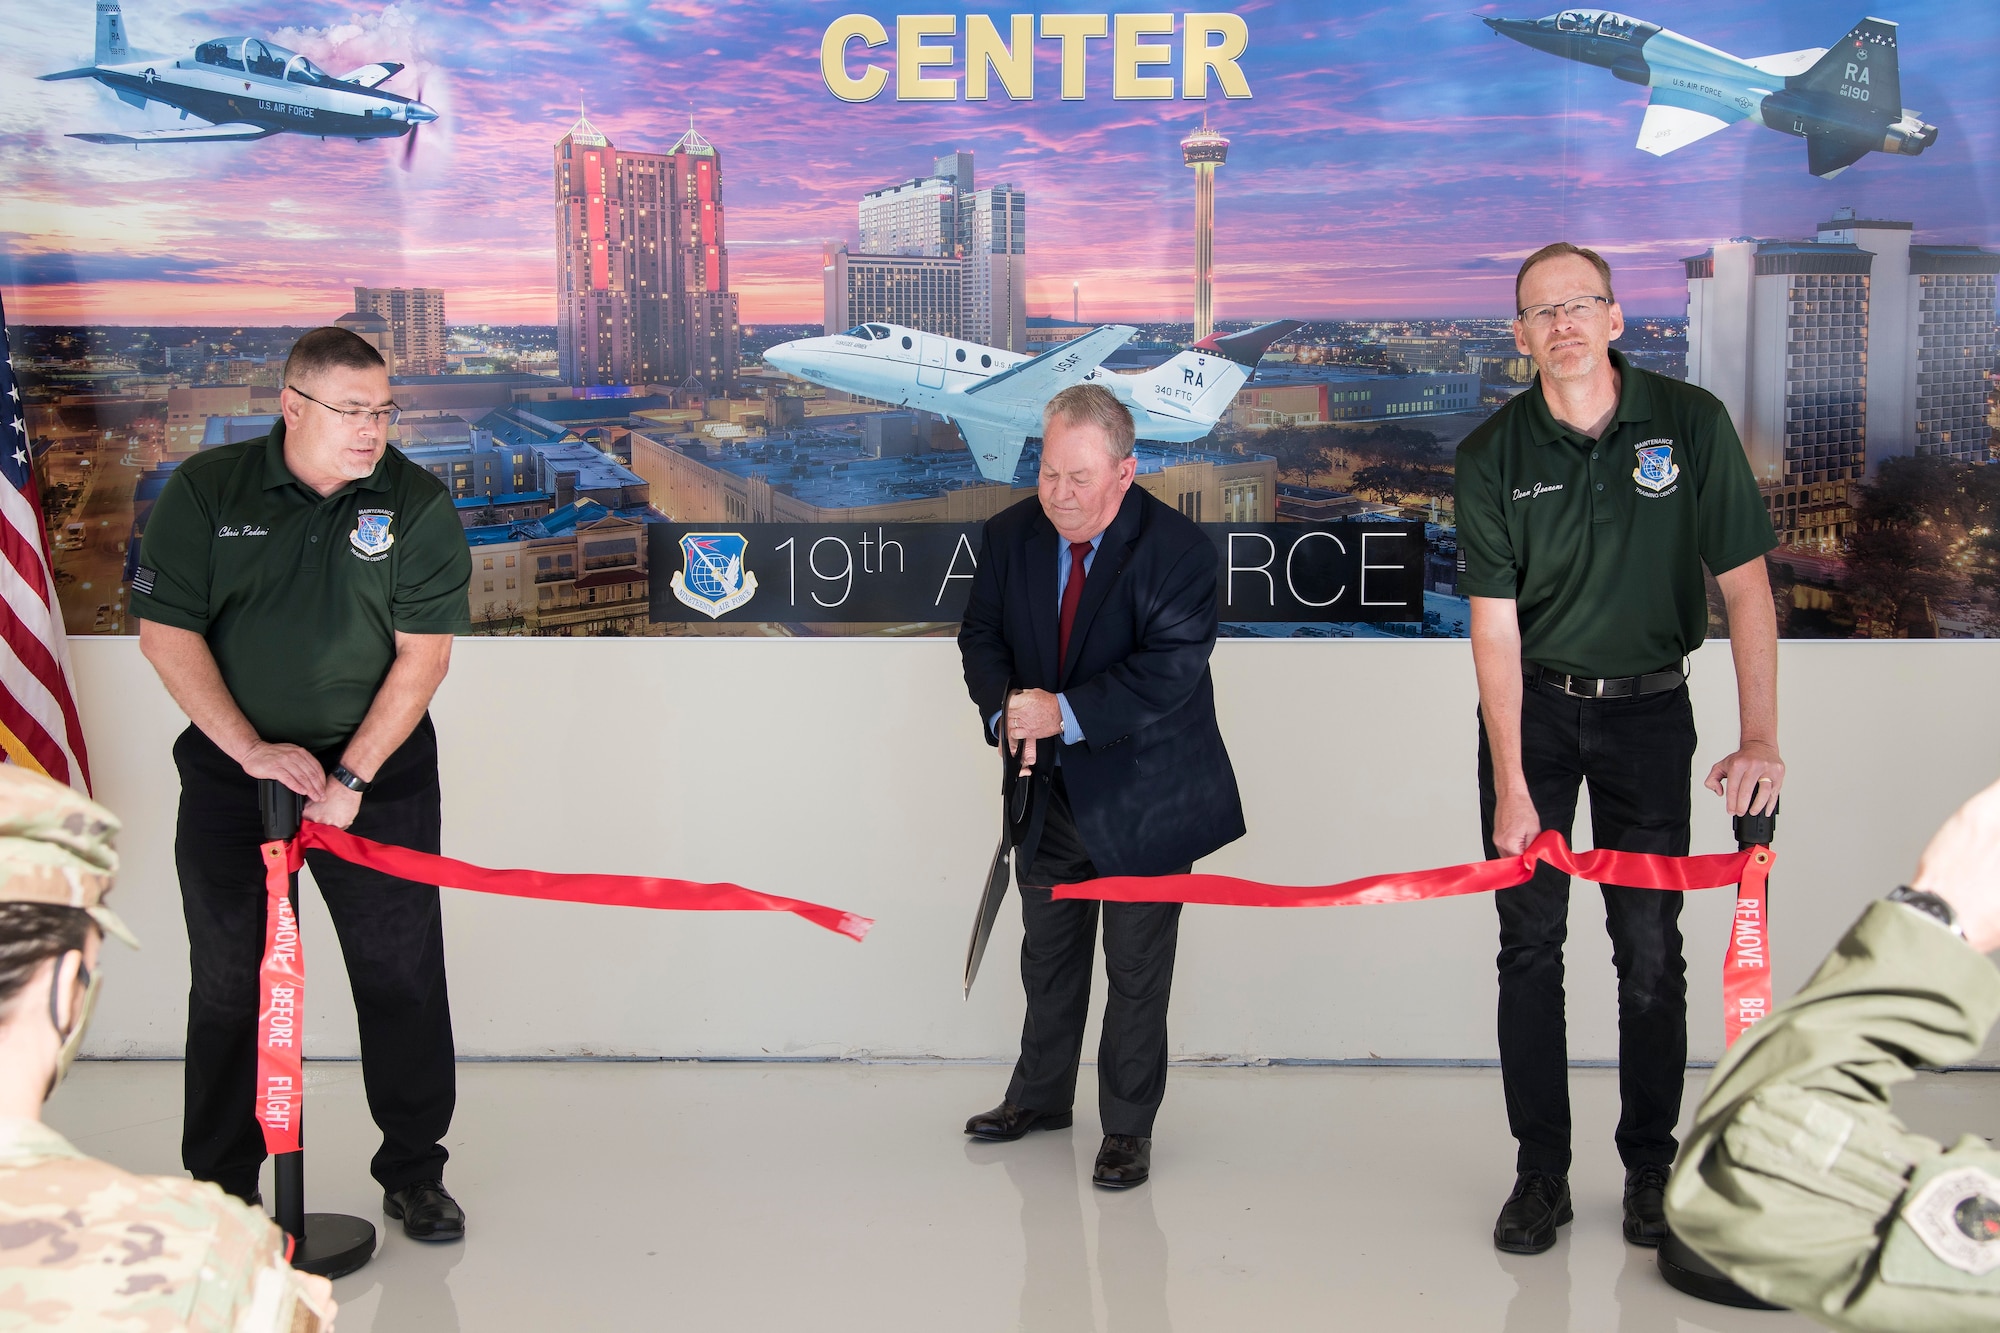 Brian Bastow, Nineteenth Air Force logistics requirements branch chief, cuts a ribbon held by Chris Padeni, Nineteenth Air Force maintenance training superintendent (right), and Dean Jeavons, Nineteenth Air Force maintenance requirements section chief (left), during the Nineteenth Air Force Maintenance Training Center activation ceremony Oct. 29, 2020, at Joint Base San Antonio-Randolph, Texas.